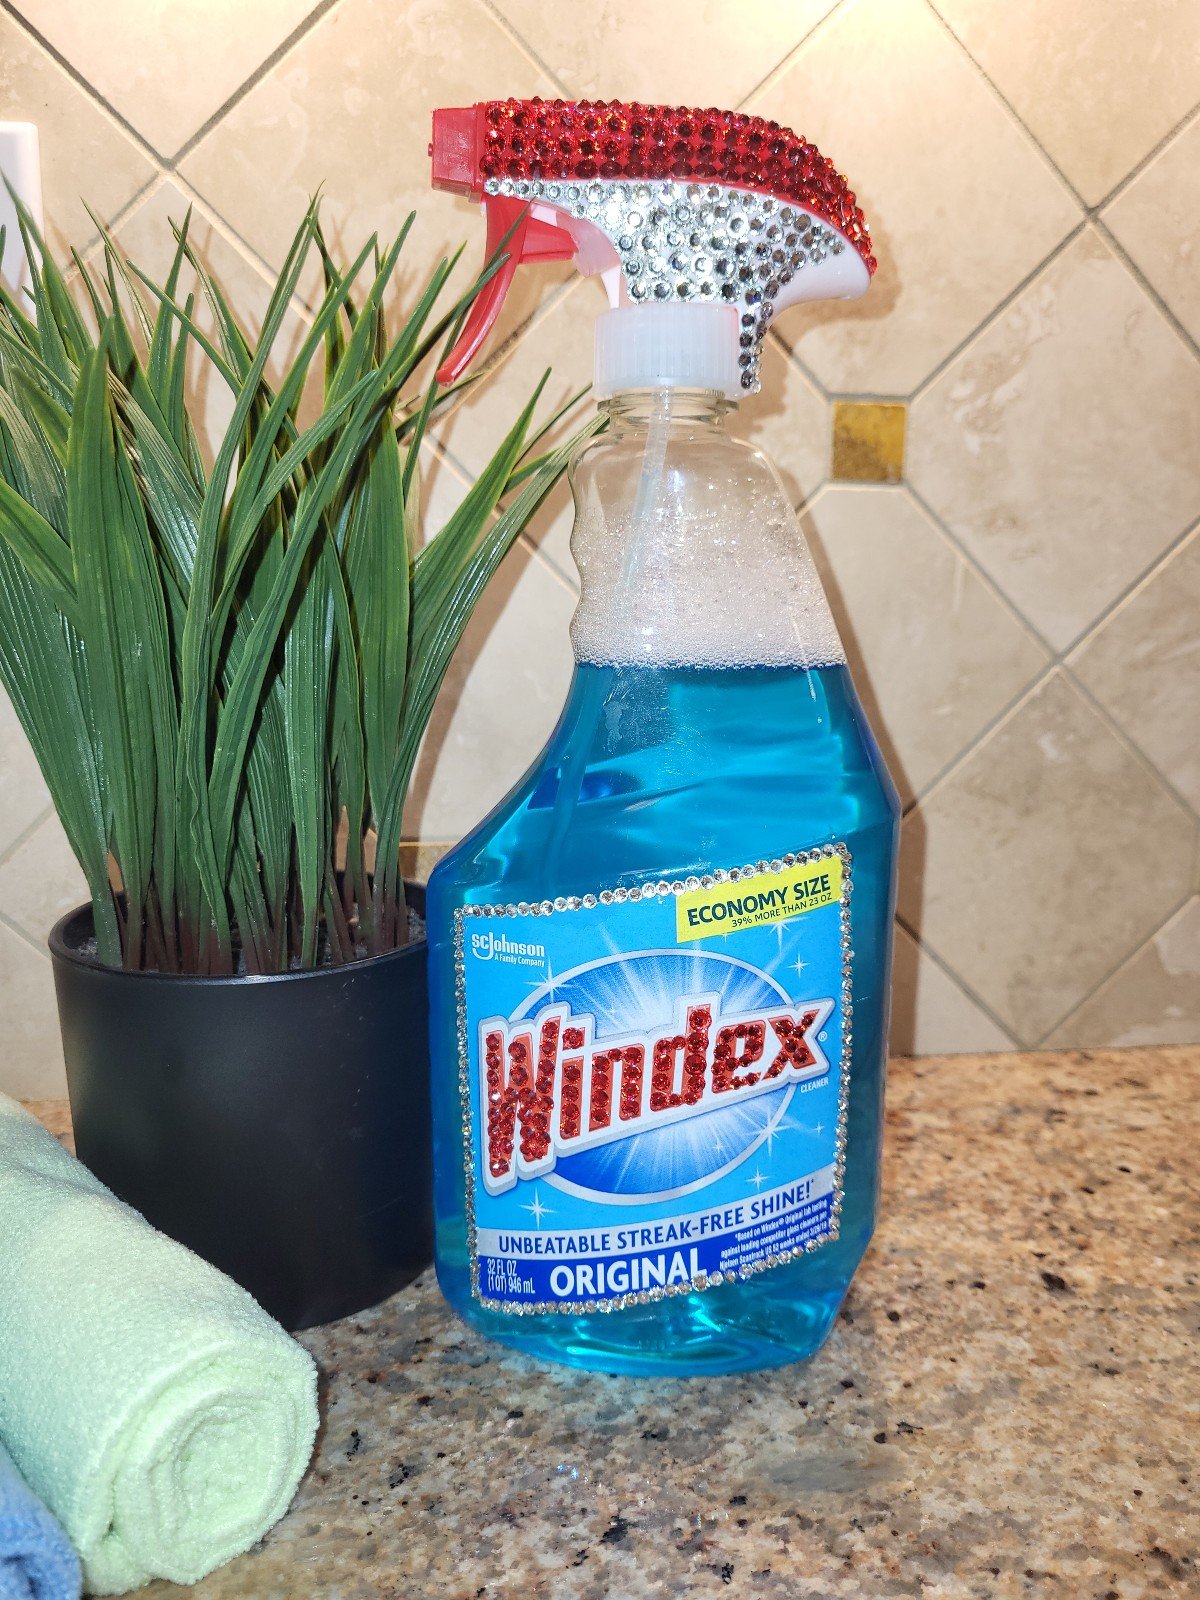 Blinged out windex 2r9R9qqVY